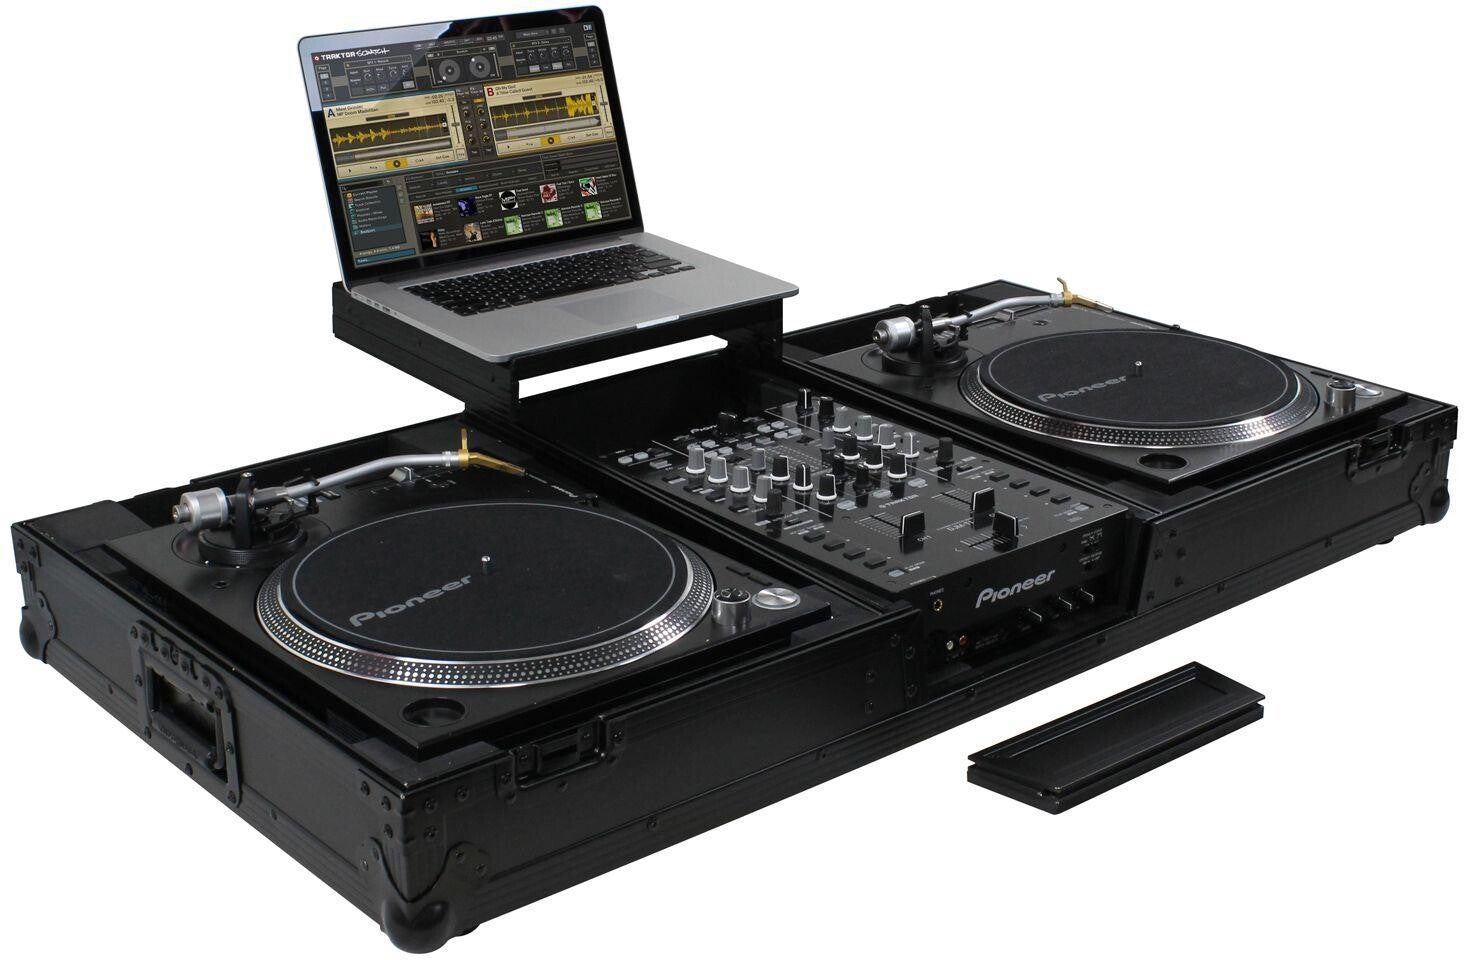 Odyssey FZGSLBM10WRBL 10-inch DJ Mixer and Turntable Flight Coffin Case